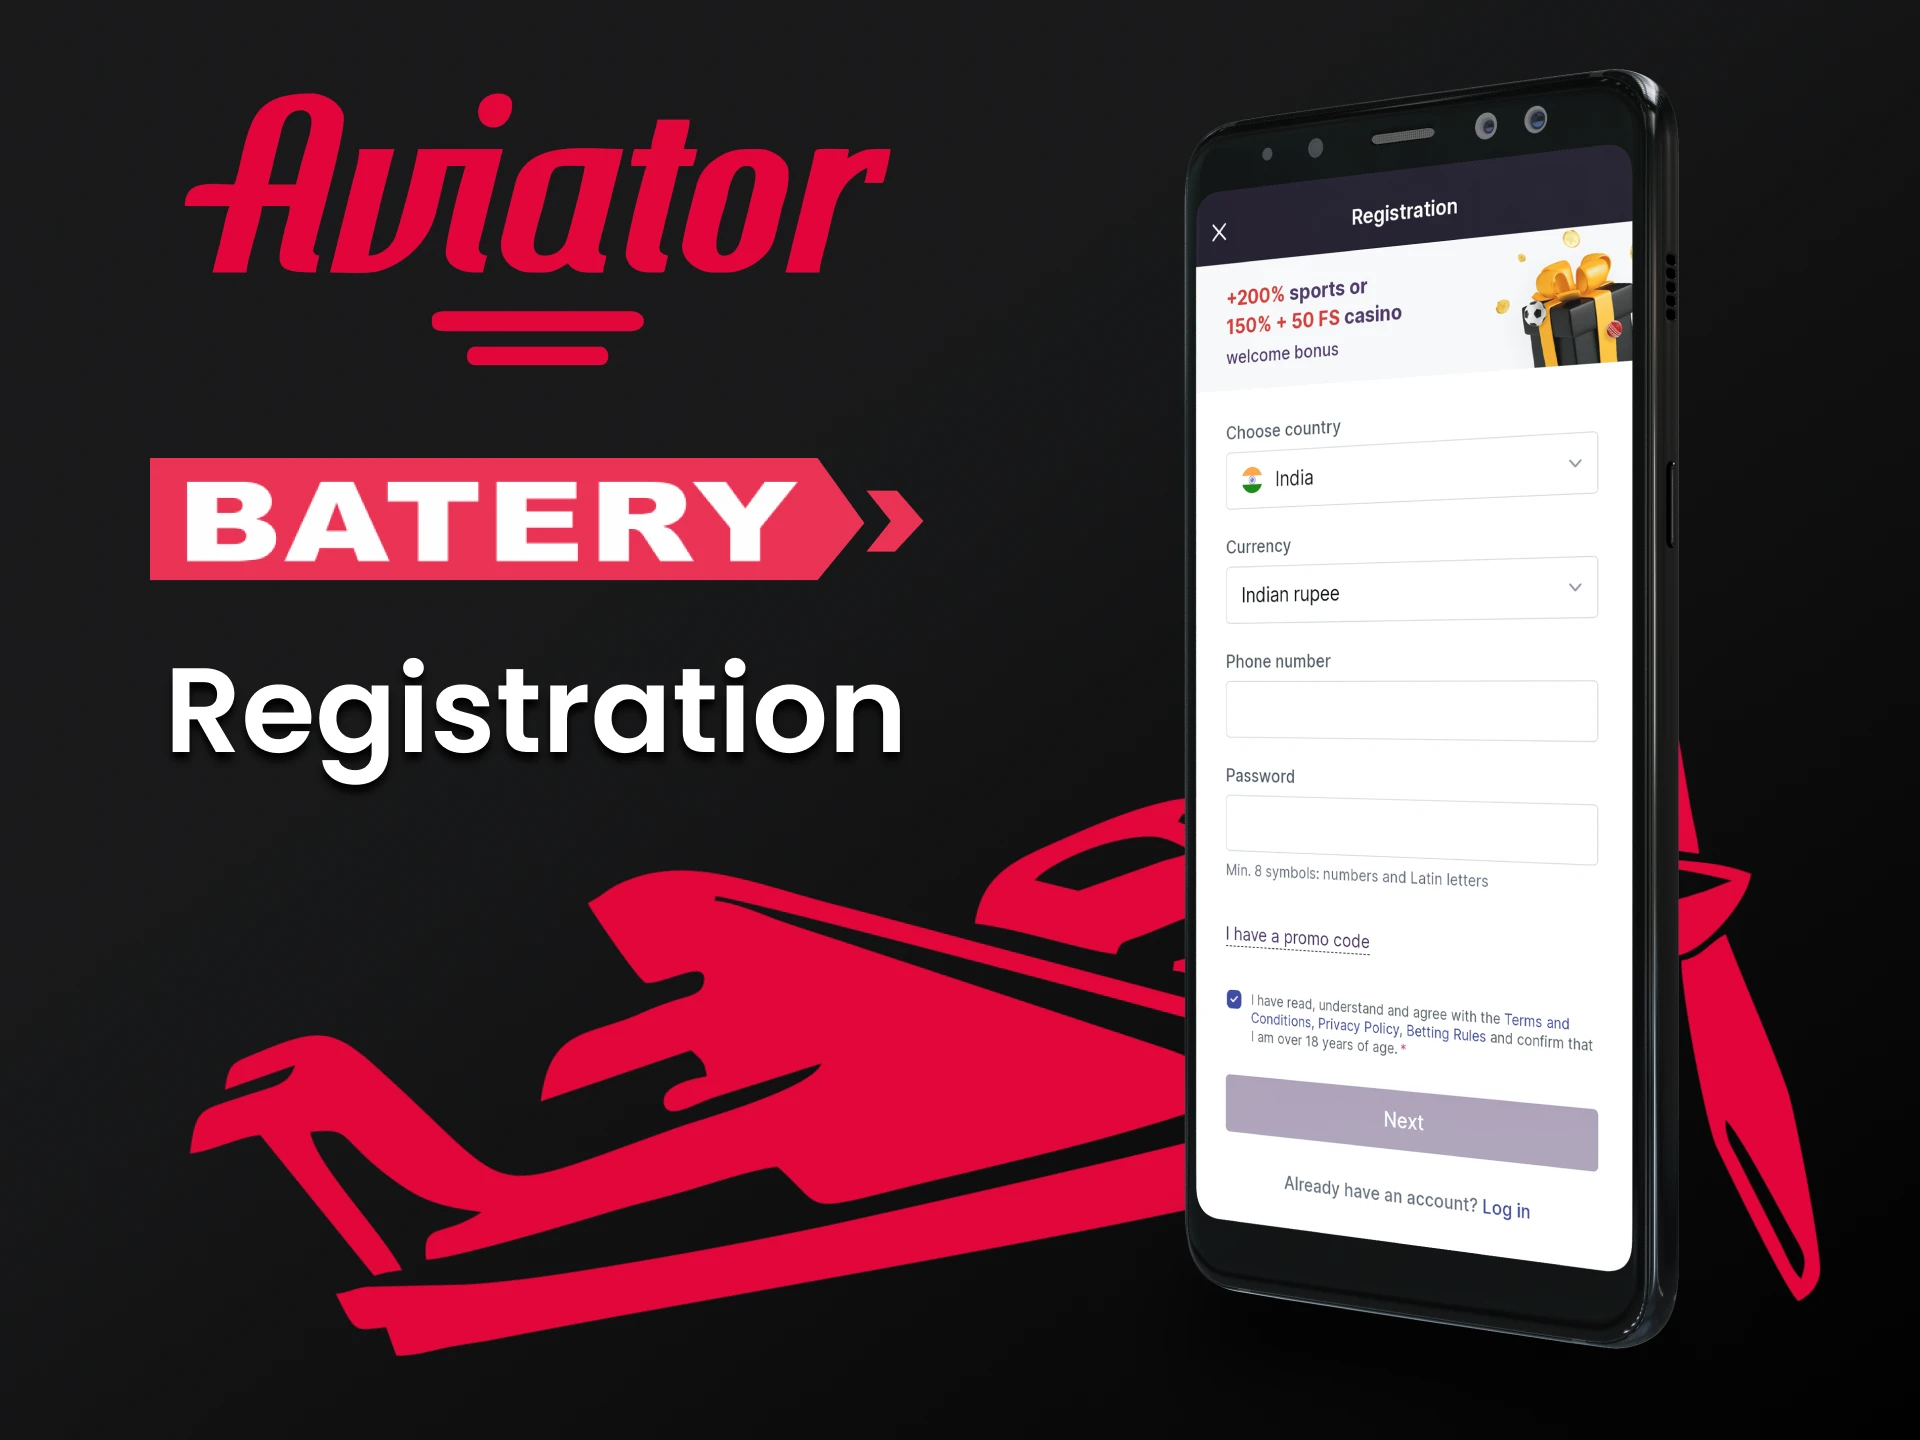 Register a personal account through the Batery app on your smartphone.